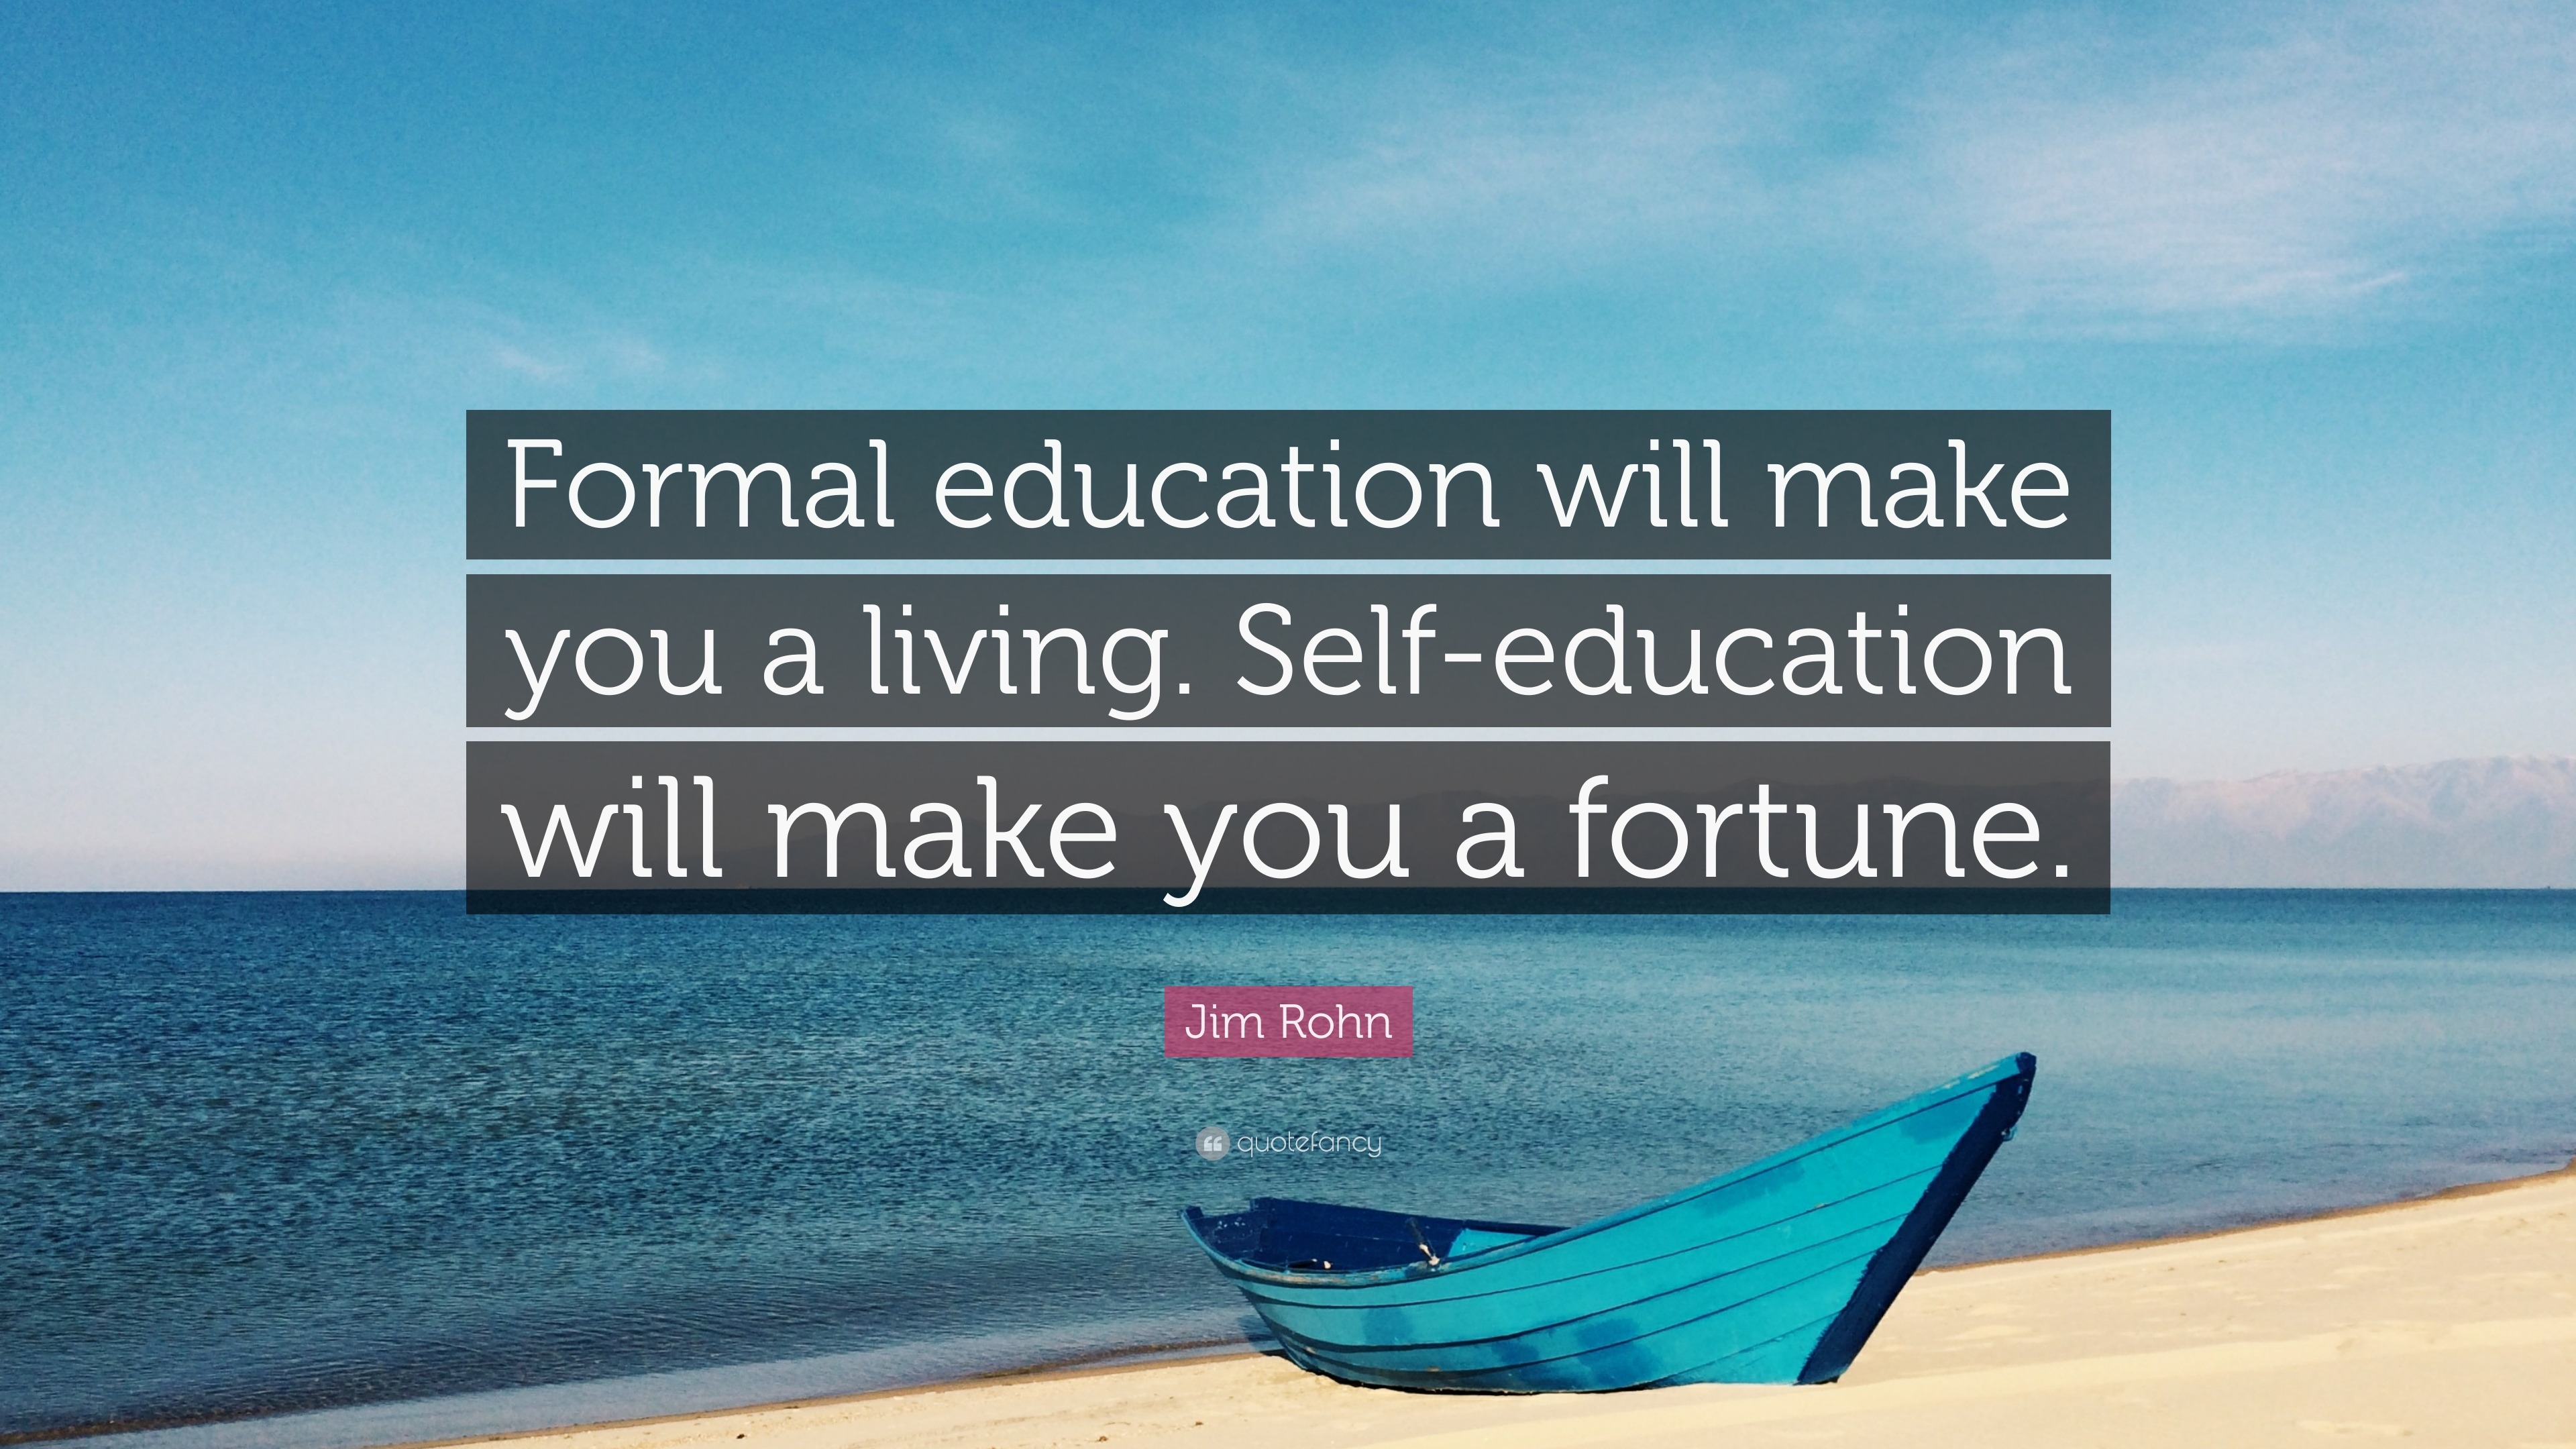 Jim Rohn Quote: “Formal education will make you a living. Self